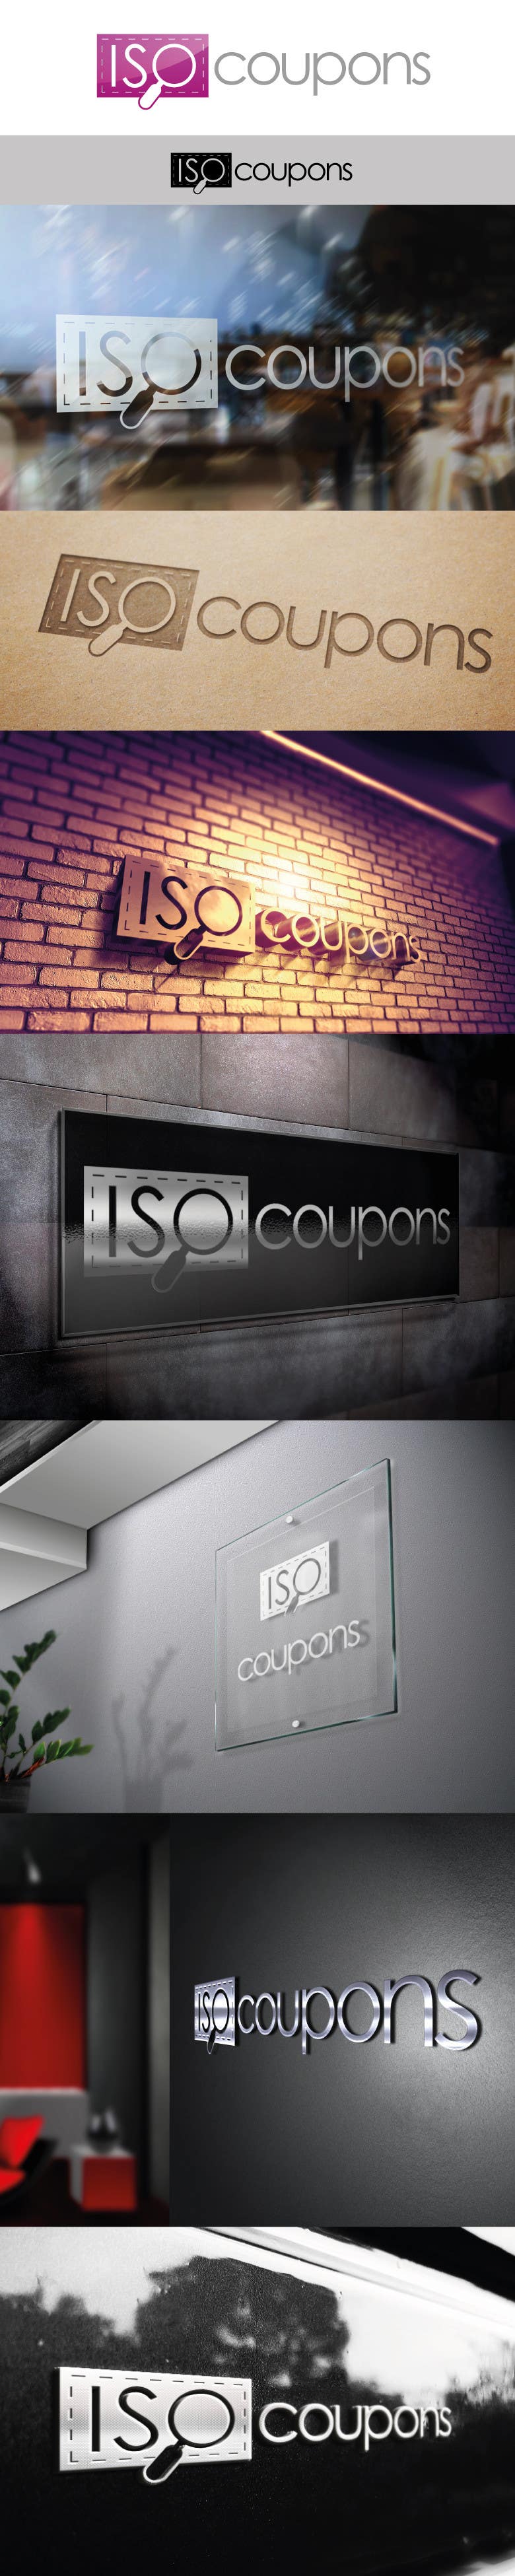 Proposition n°70 du concours                                                 Logo Design for isocoupons.com
                                            